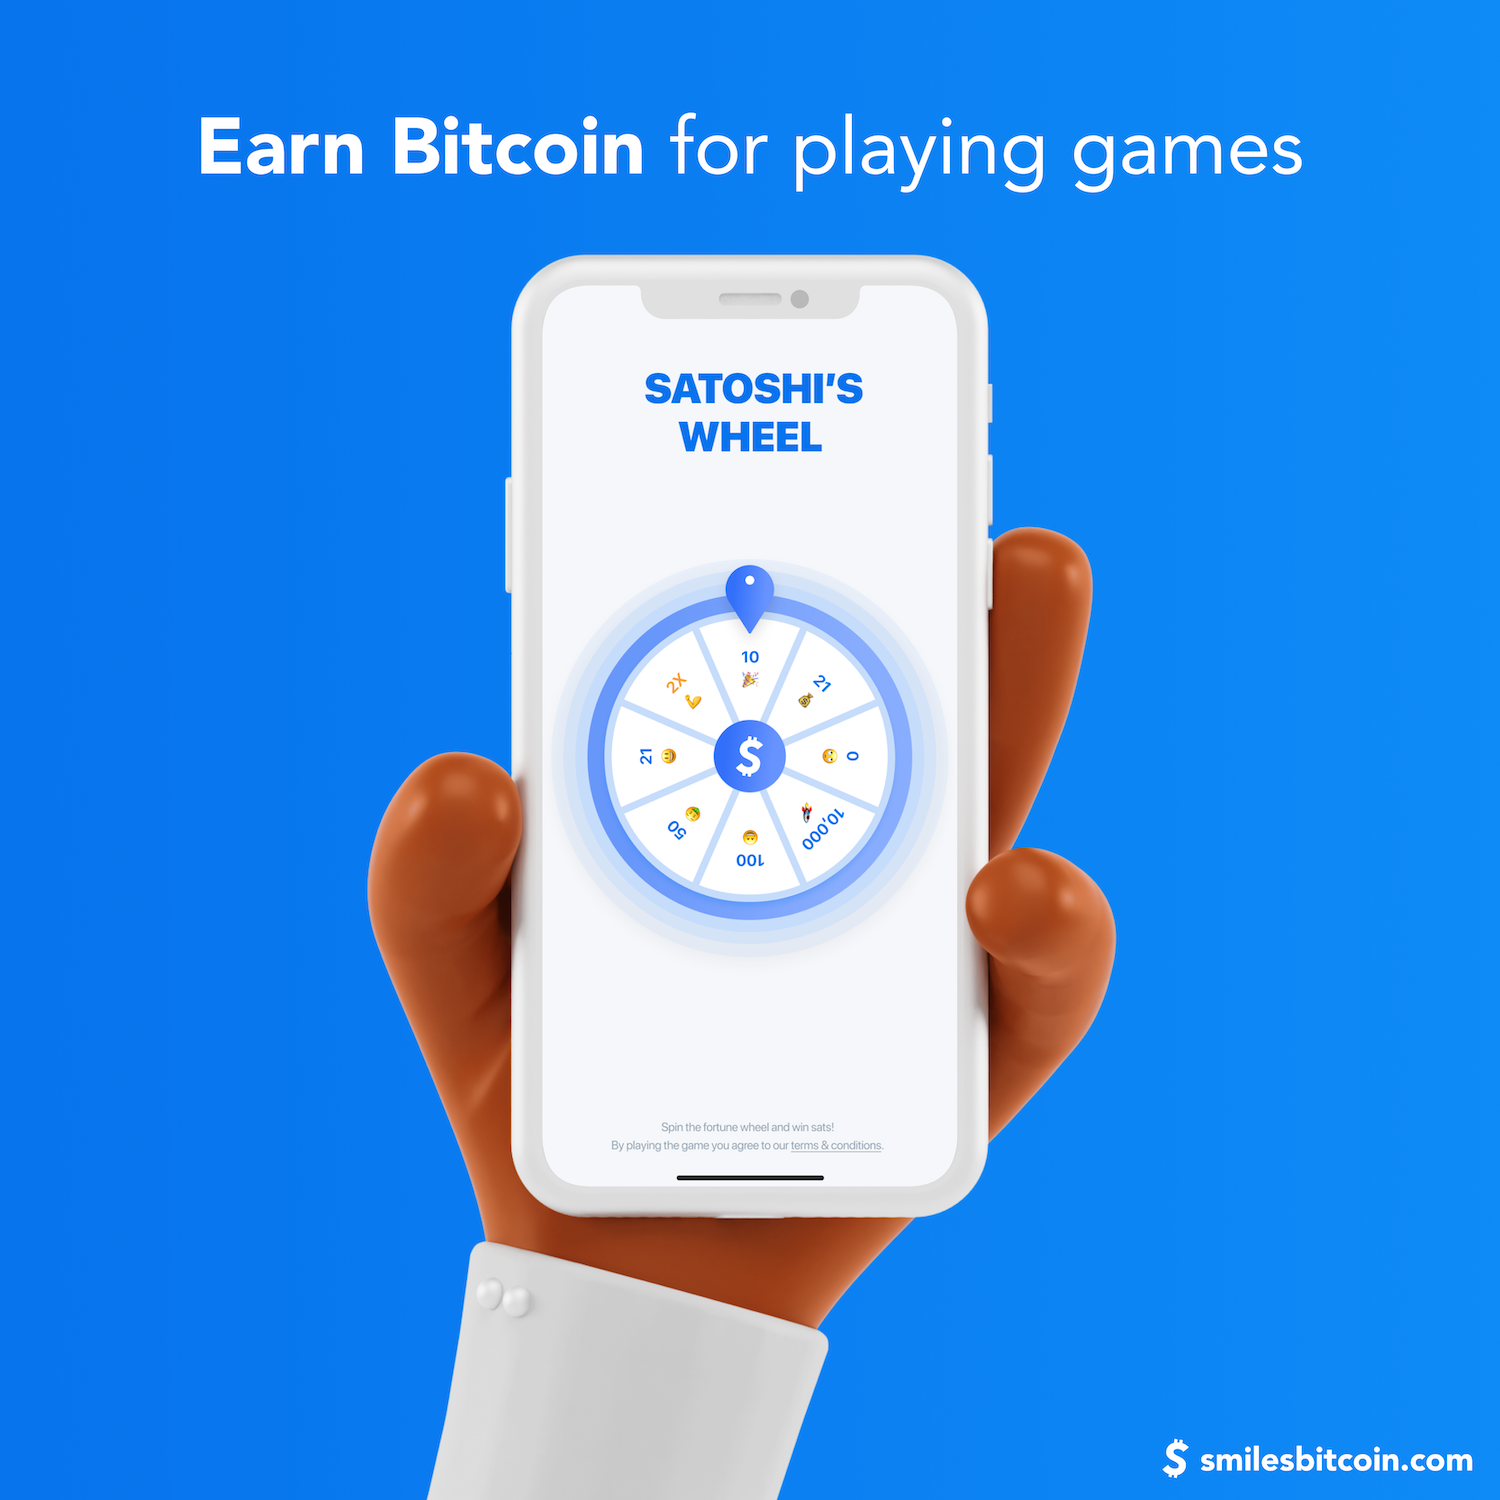 Spin Satoshi's Wheel and win some sats